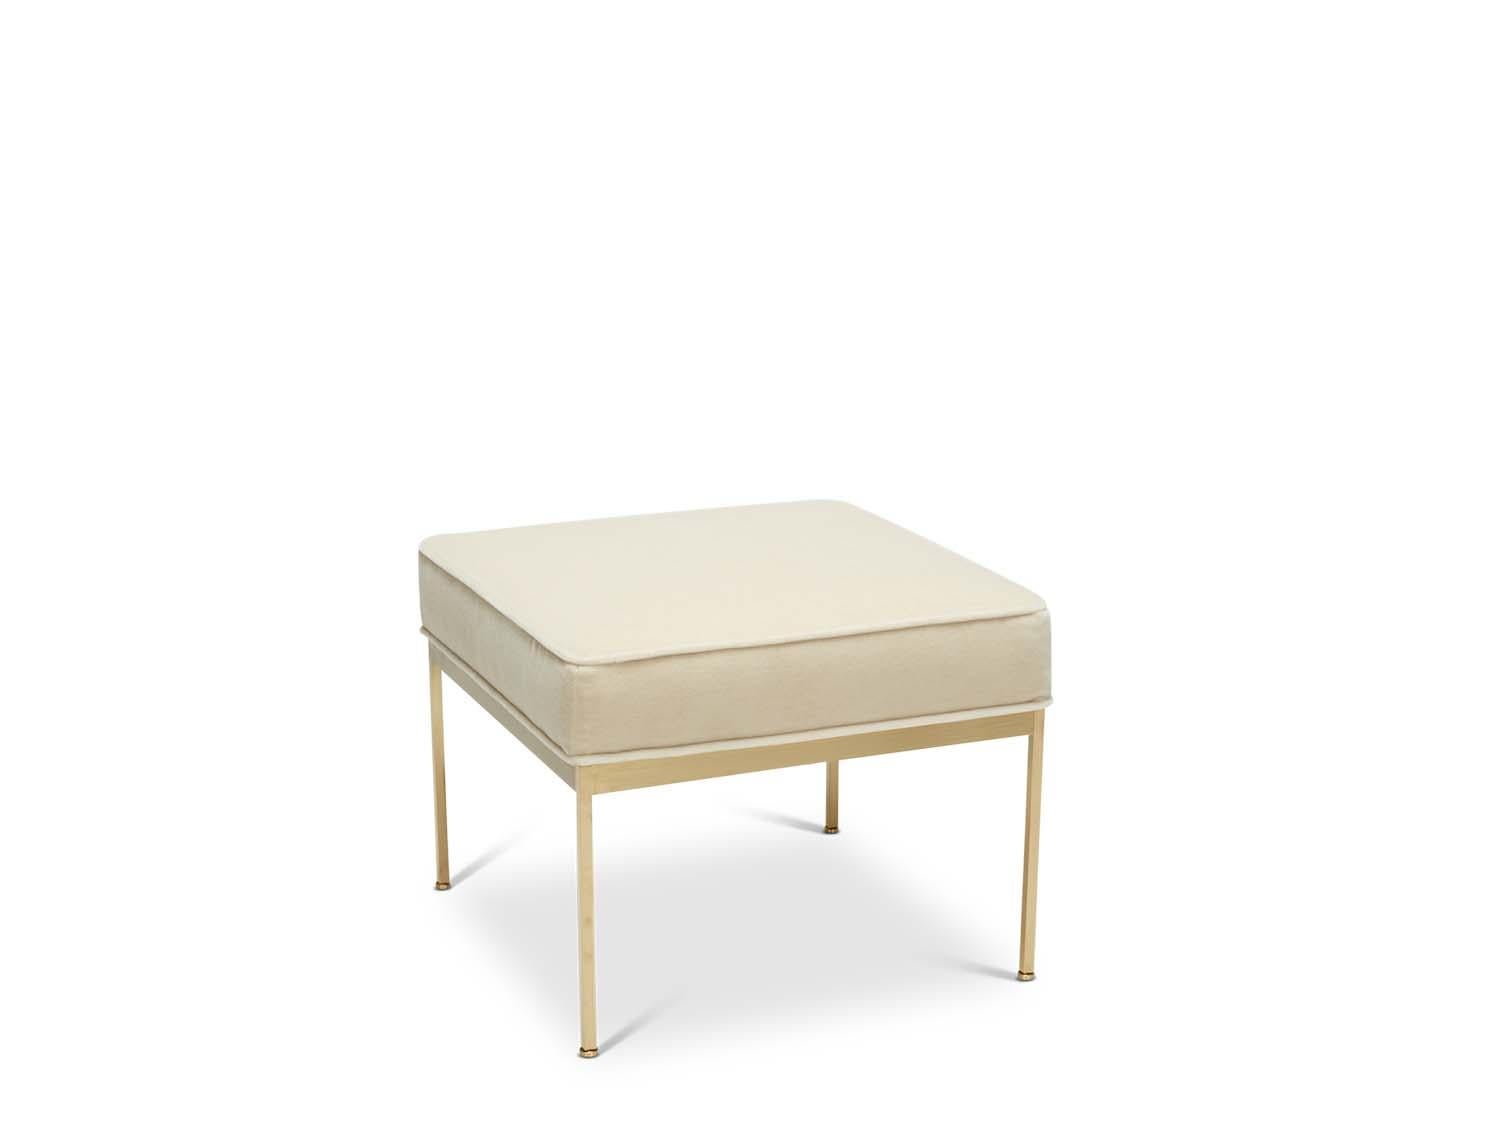 The Paul ottoman features a solid lacquered brass base and an upholstered seat with piping. Each leg features a rounded leveler.

Inspired by the clean lines and brass detailing of early mid-century Paul McCobb designs.

The Lawson-Fenning